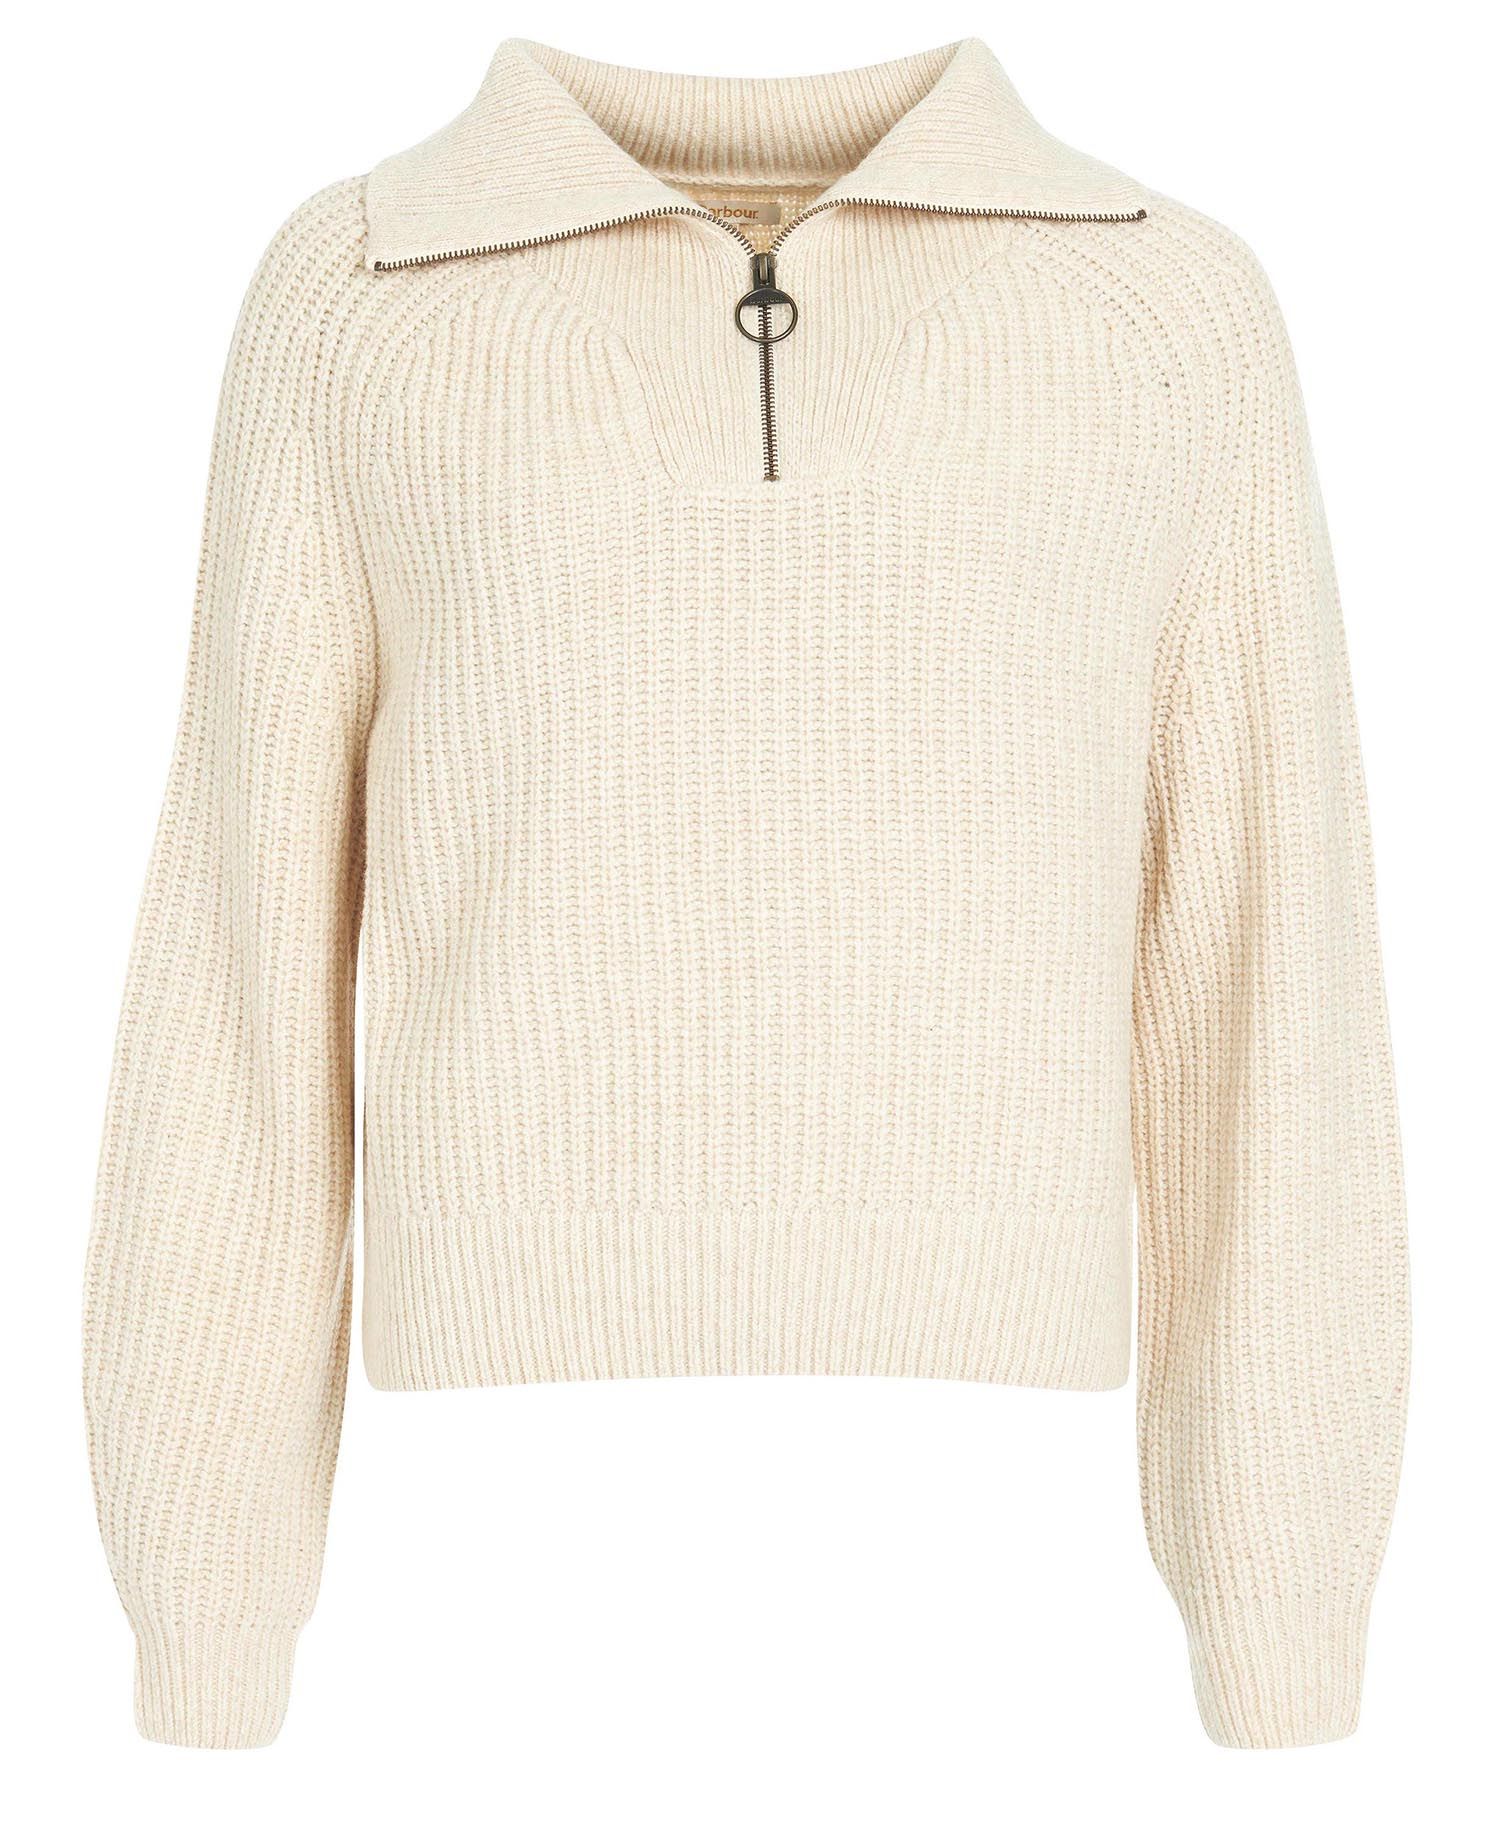 Barbour Stanton Knit Oatmeal